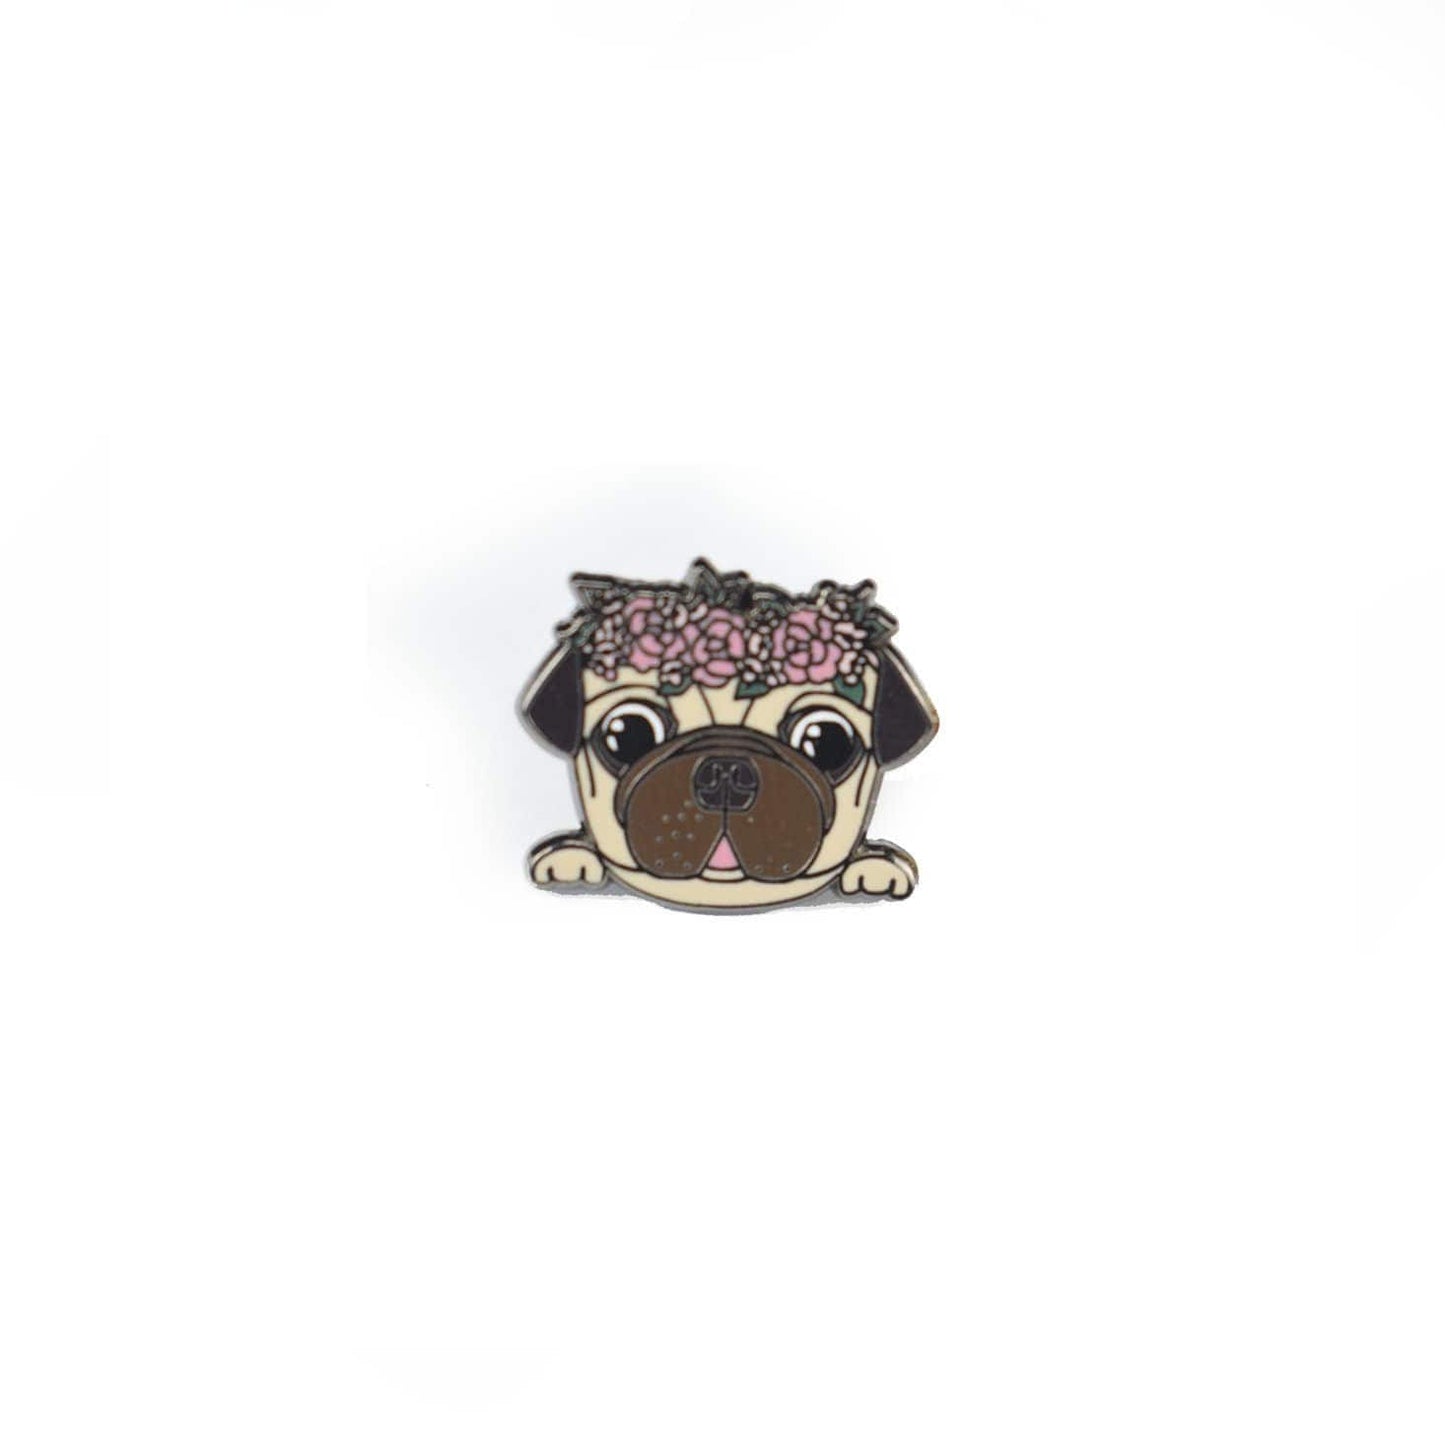 Pug with Floral Crown - Small Enamel Pin, Pins, Brooches & Lapel Pins